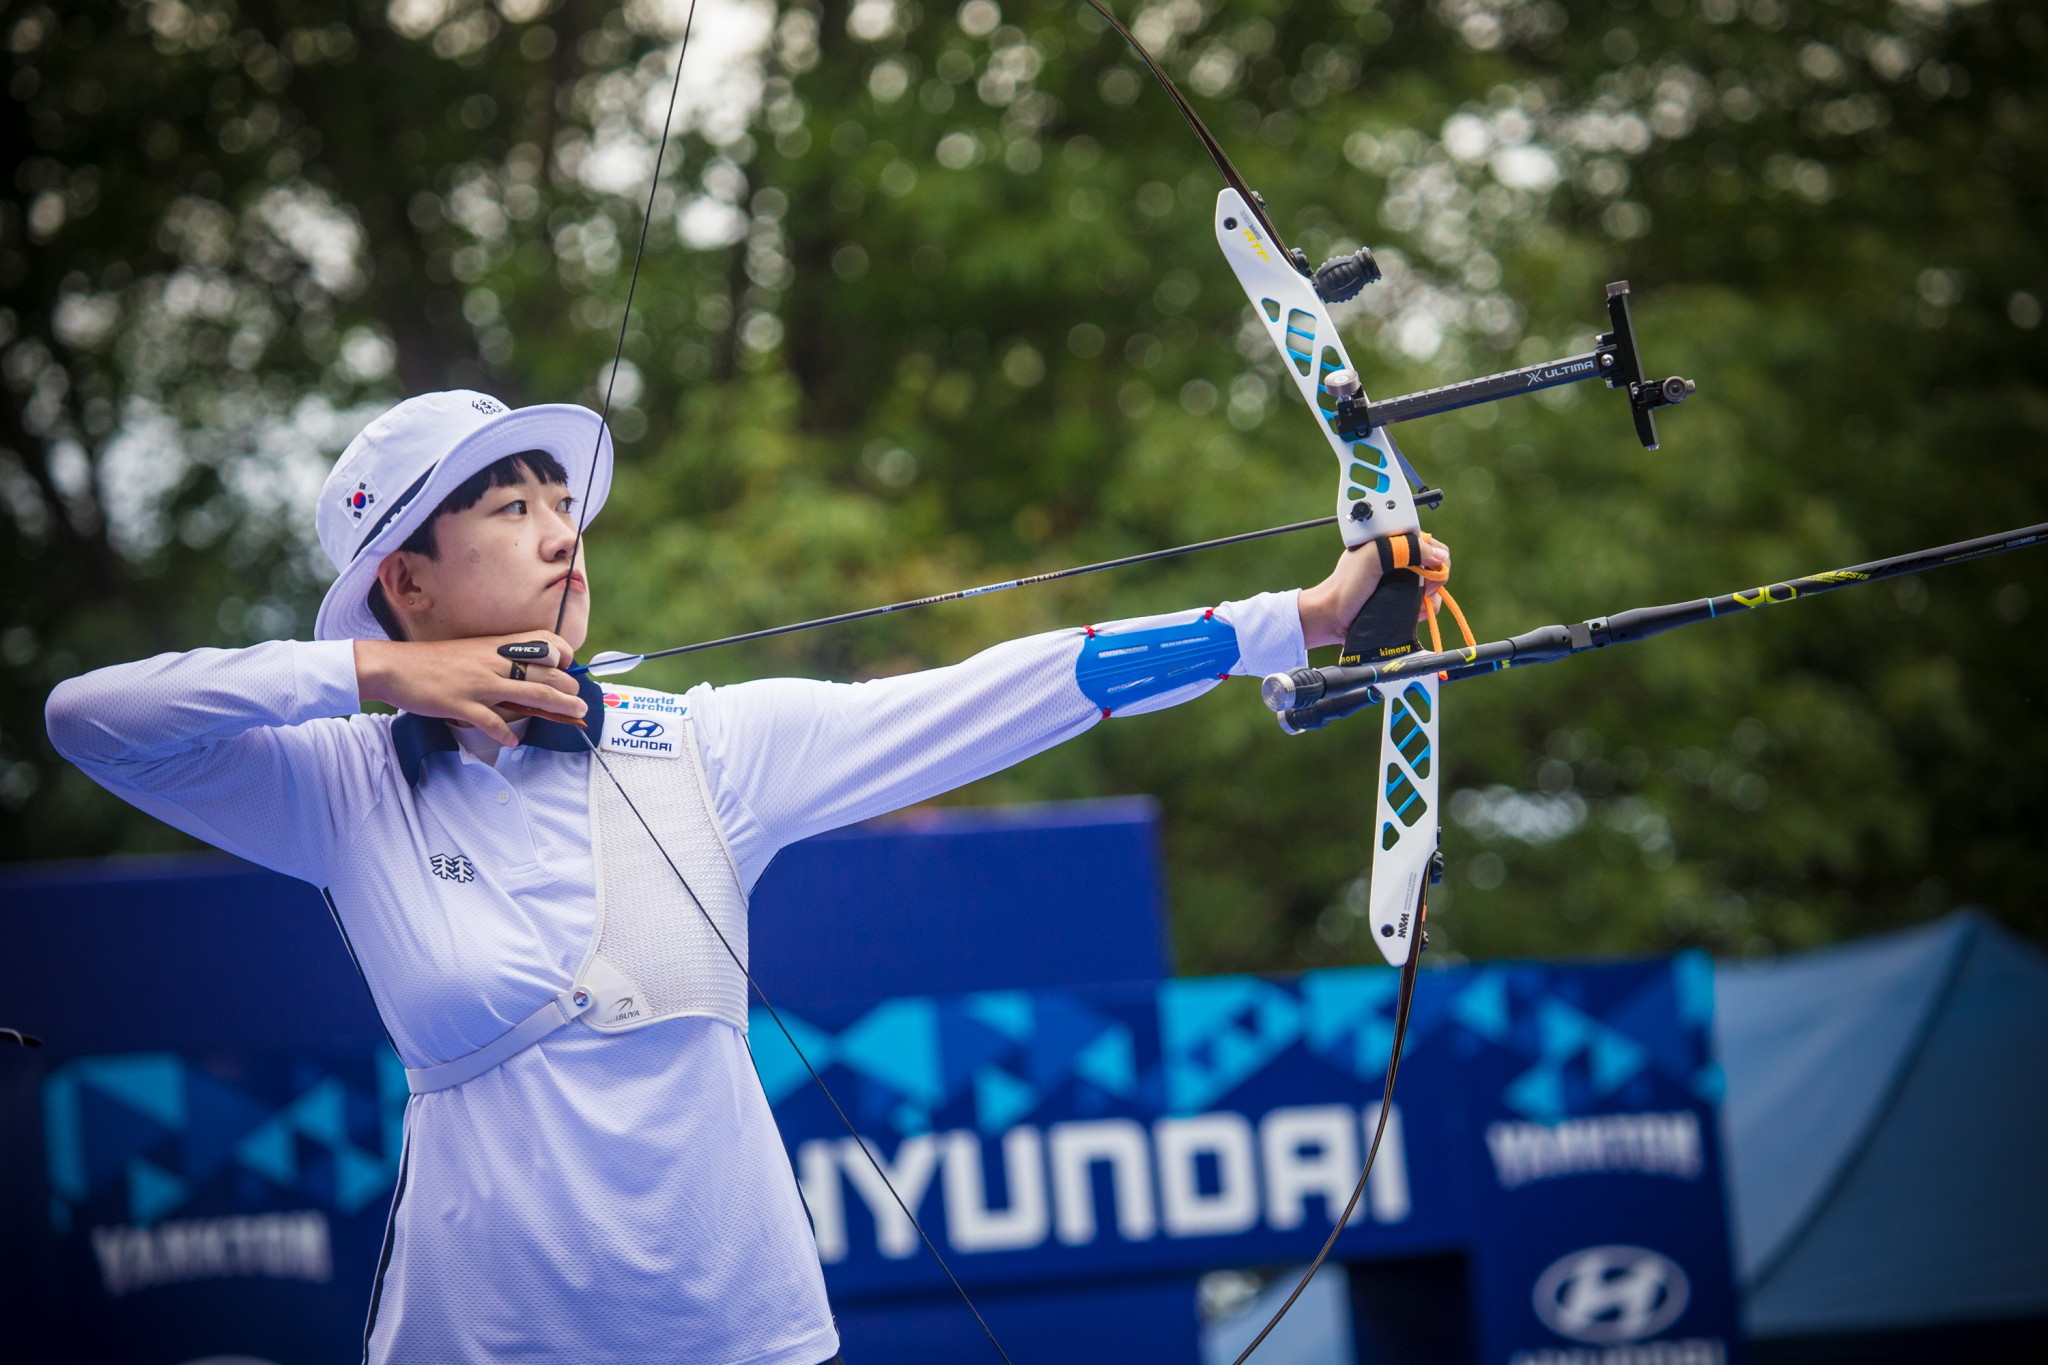 Olympic champion An among star names seeking final berth at Archery World Cup in Medellín